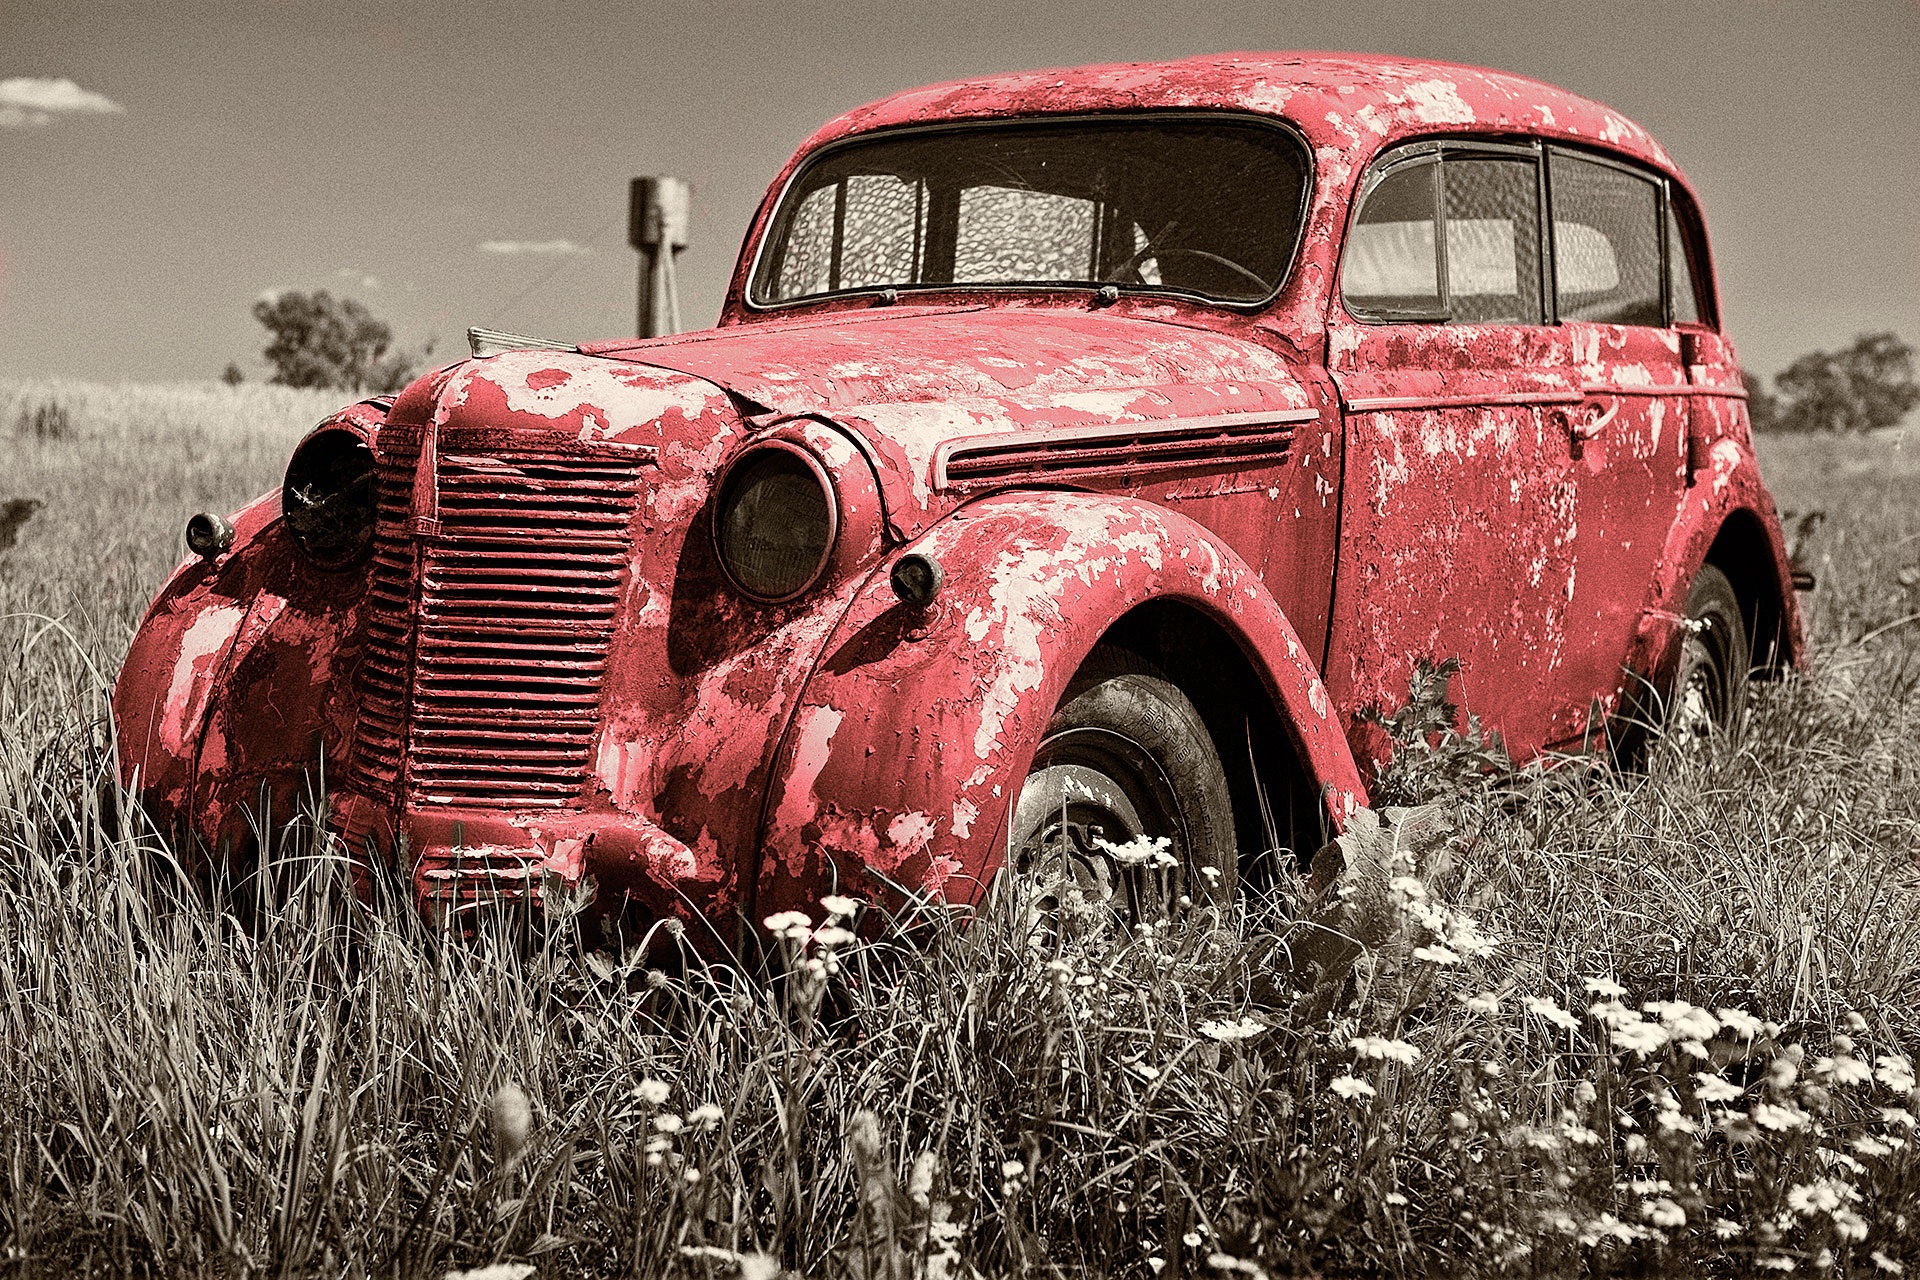 Vintage rusty old red car abandoned in field